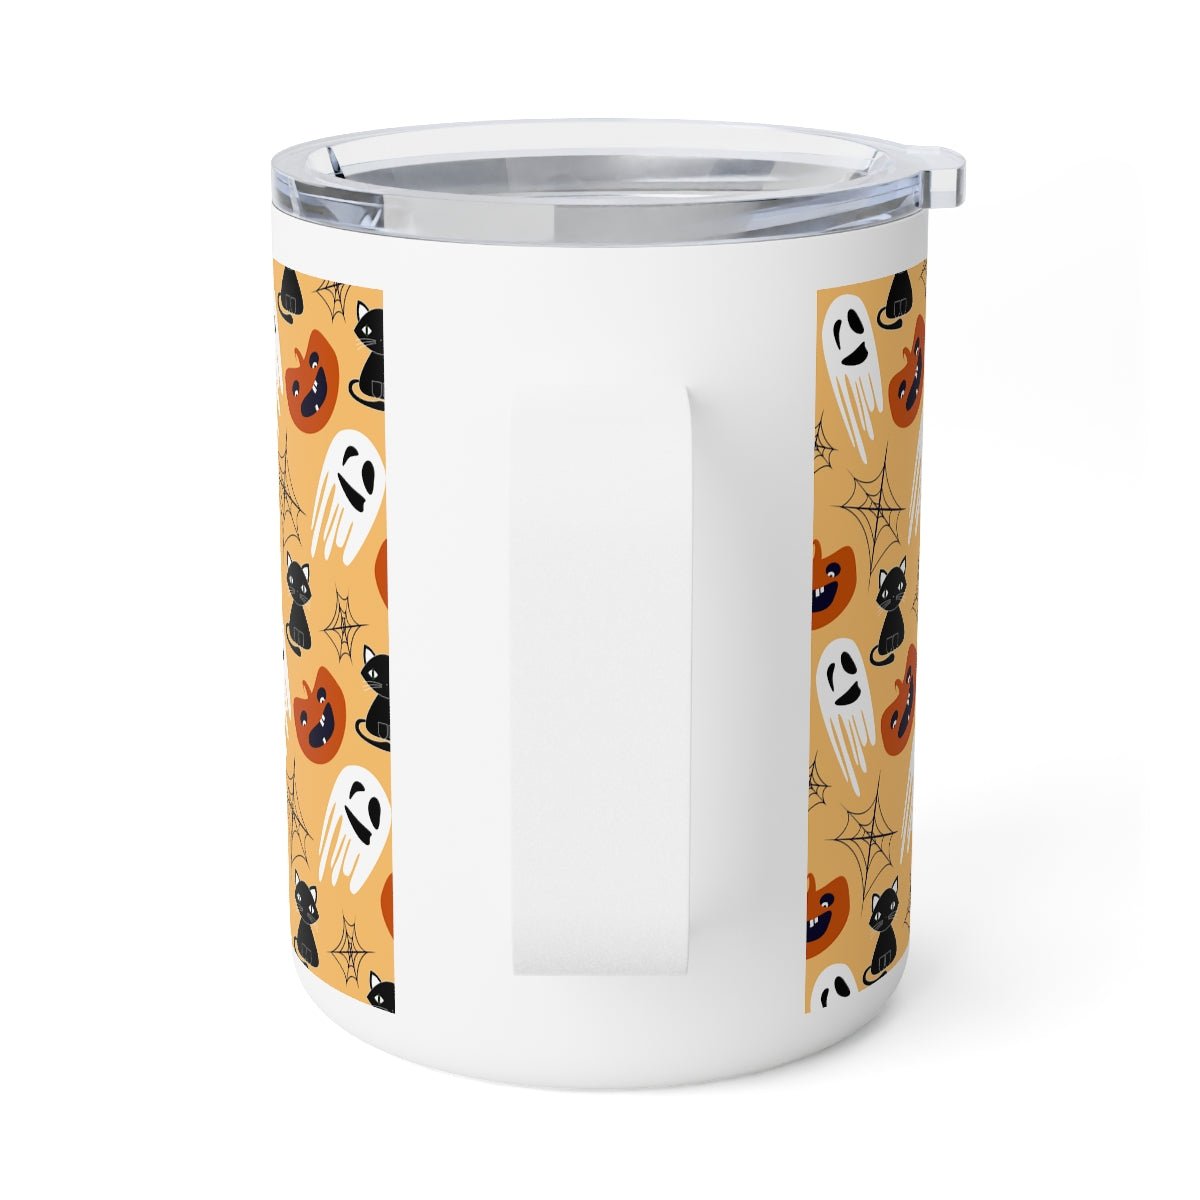 Halloween Cats and Ghosts Insulated Coffee Mug, 10oz - Puffin Lime